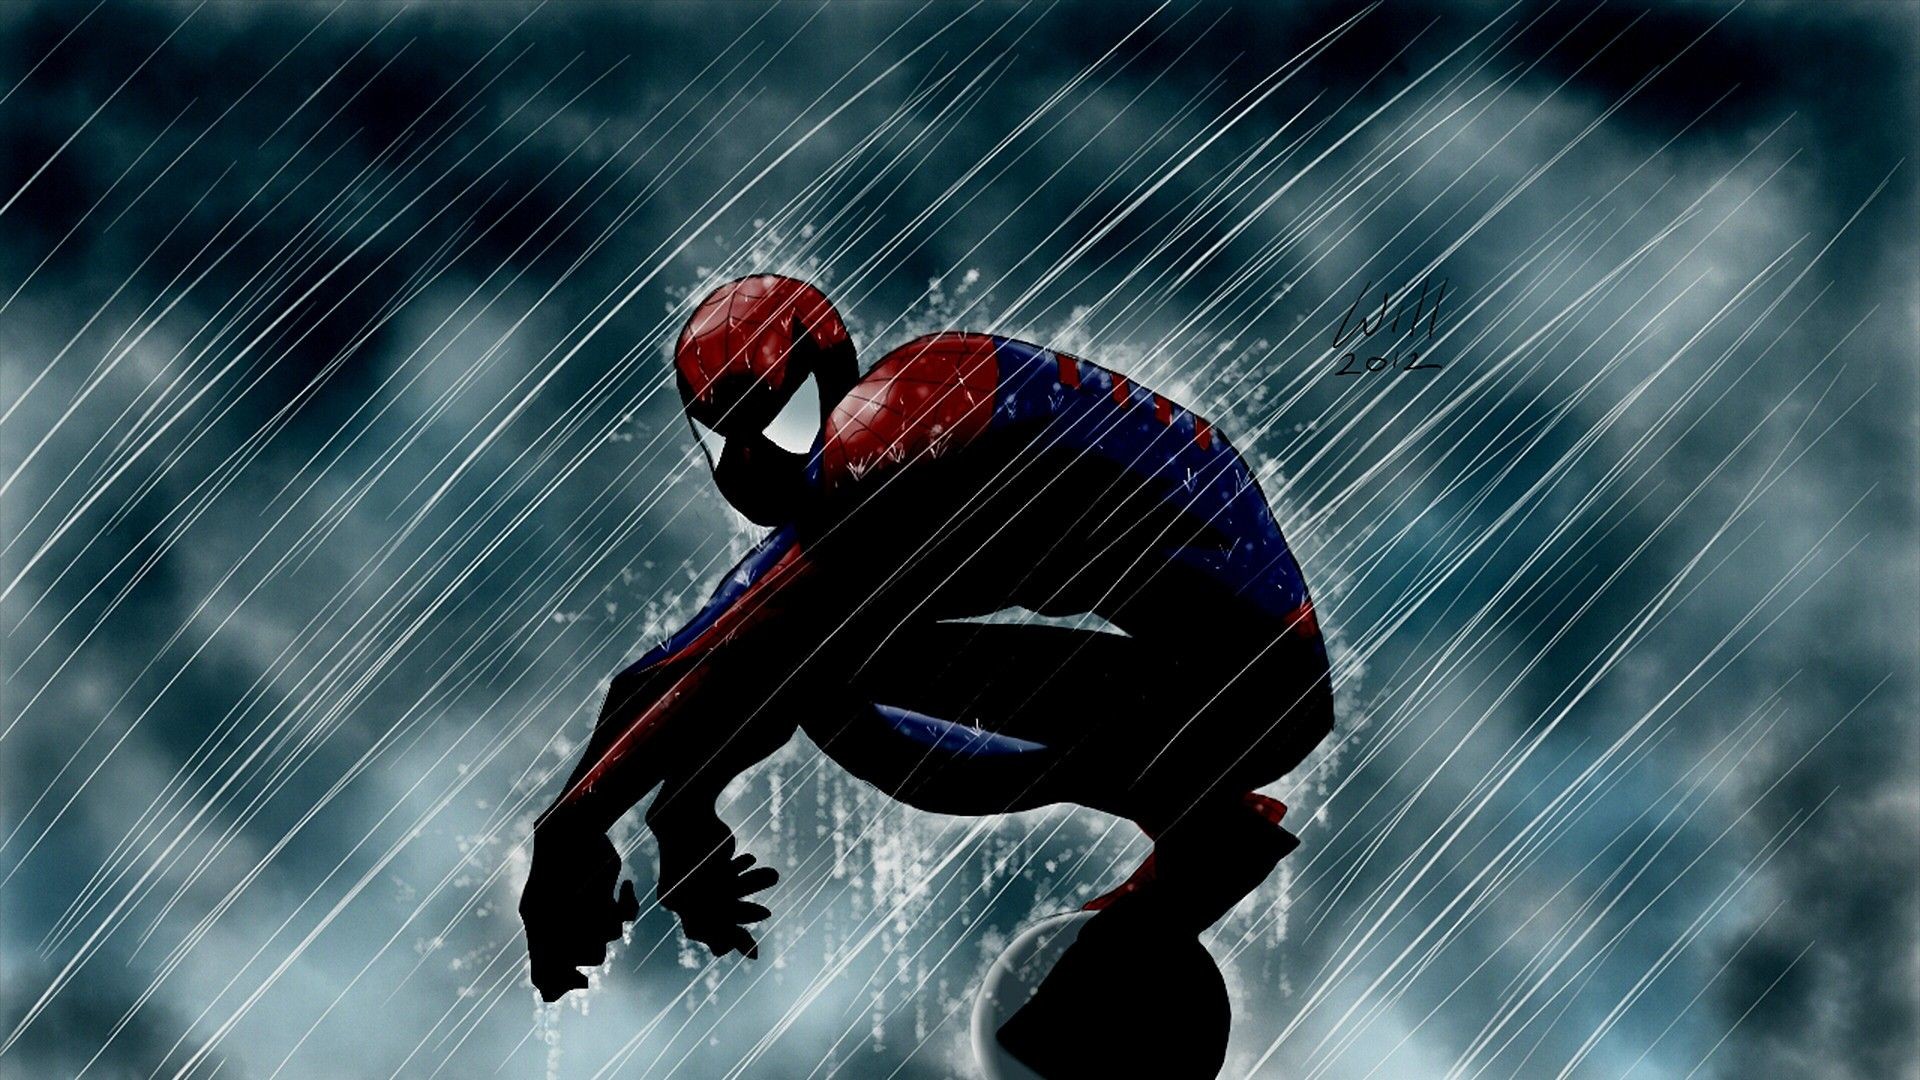 1920x1080 Awesome dramatic Spiderman in the rain wallpaper []